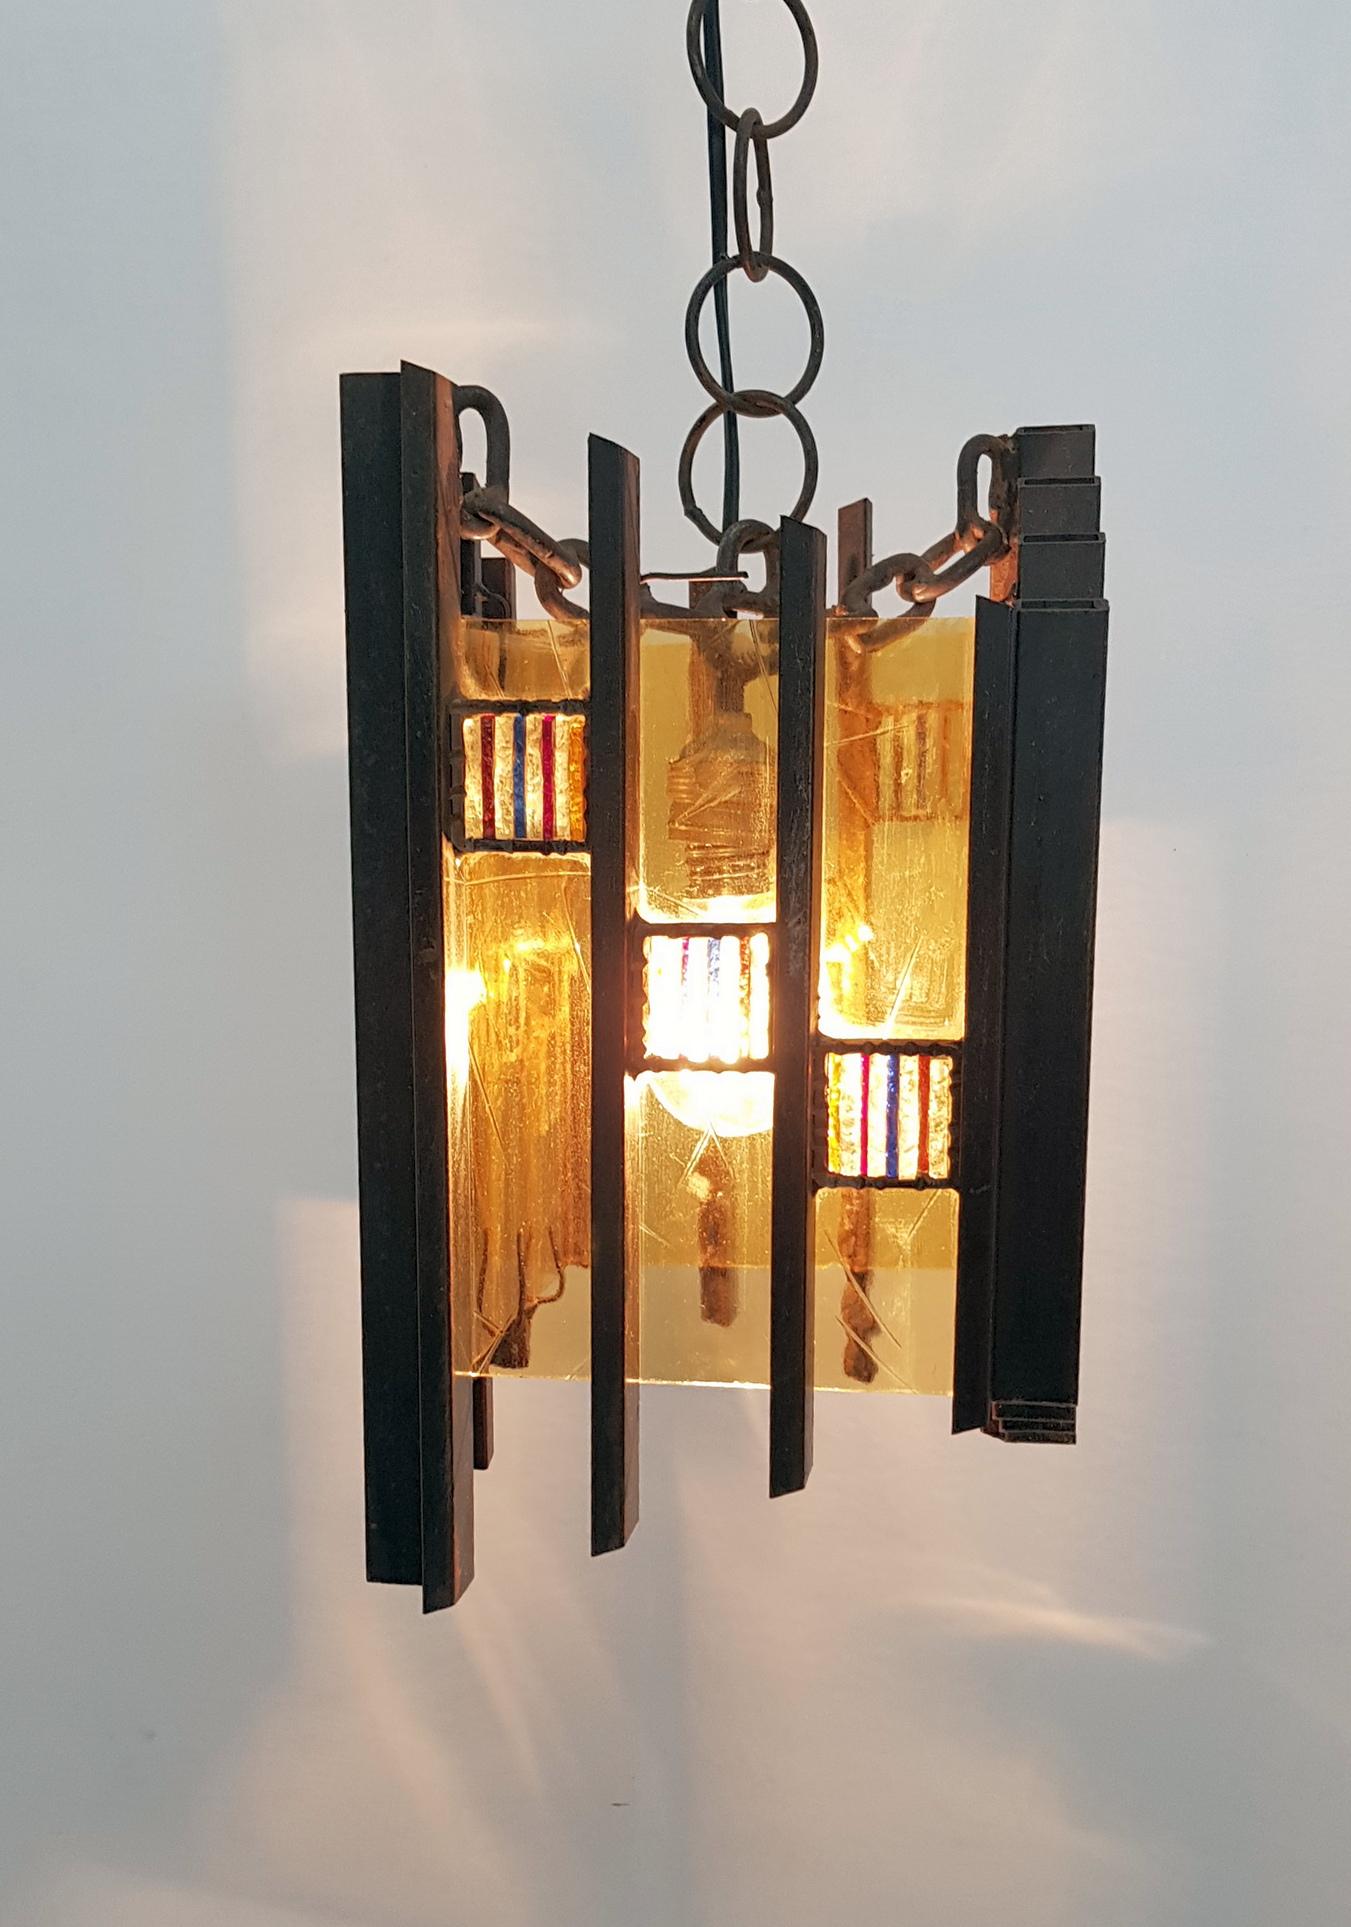 Rare Brutalist style ceiling lamp handmade by Italian manufacturer Longobard in iron and colored glass. In good working condition. The height of the lamp is 35cm without chain which measures 12cm. The original chain can be exchanged for a longer one